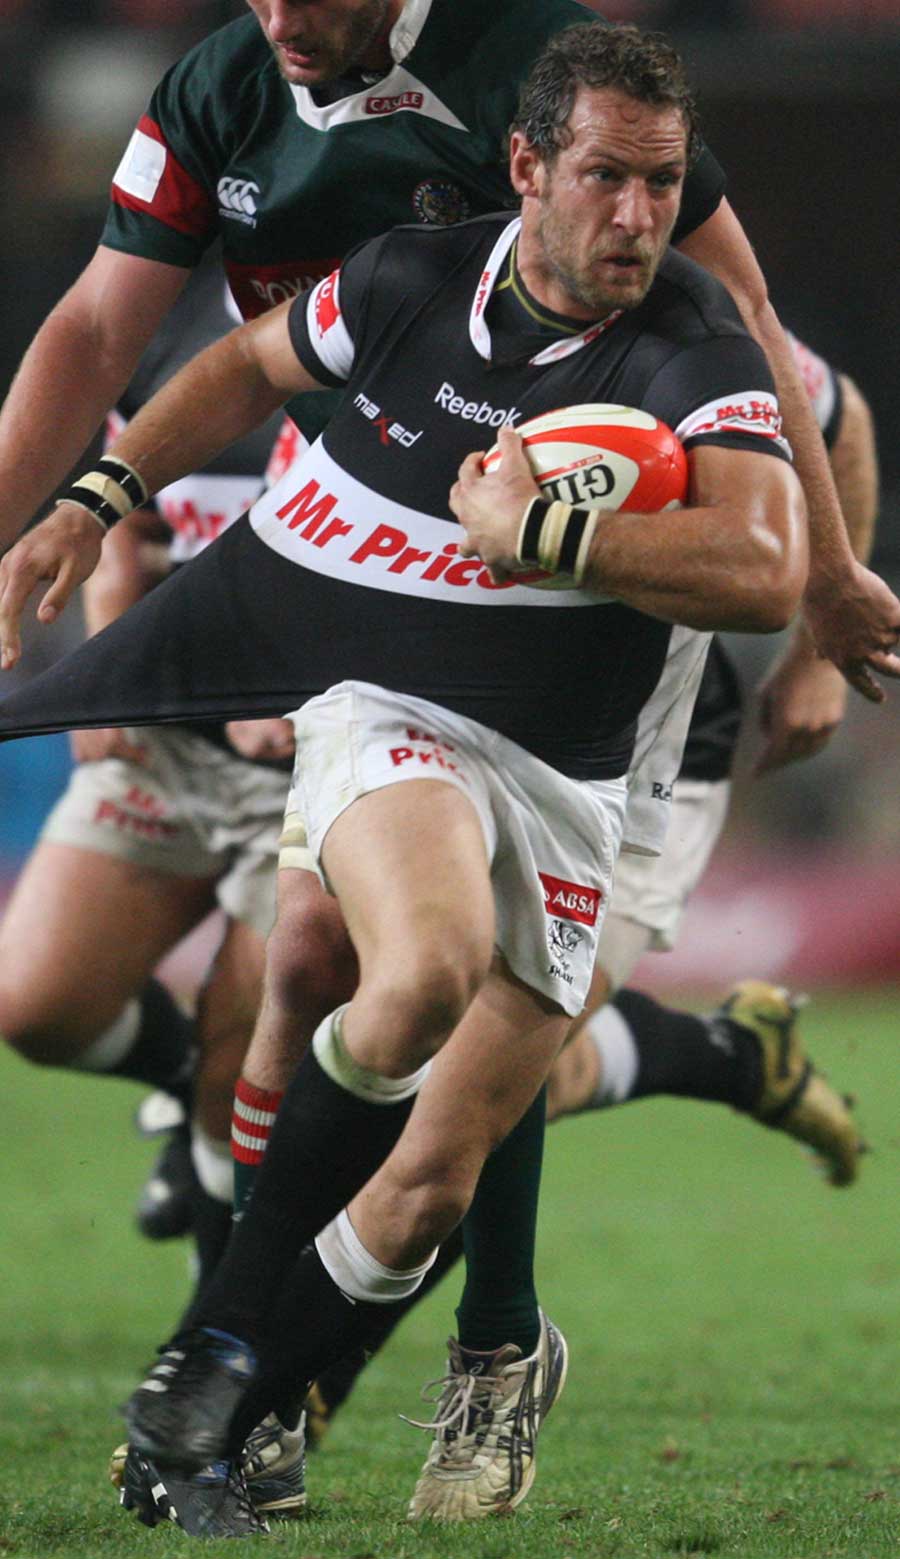 Sharks centre Andries Strauss stretches the Leopards defence, Sharks v Leopards, Currie Cup, Absa Stadium, Durban, South Africa, October 1, 2010